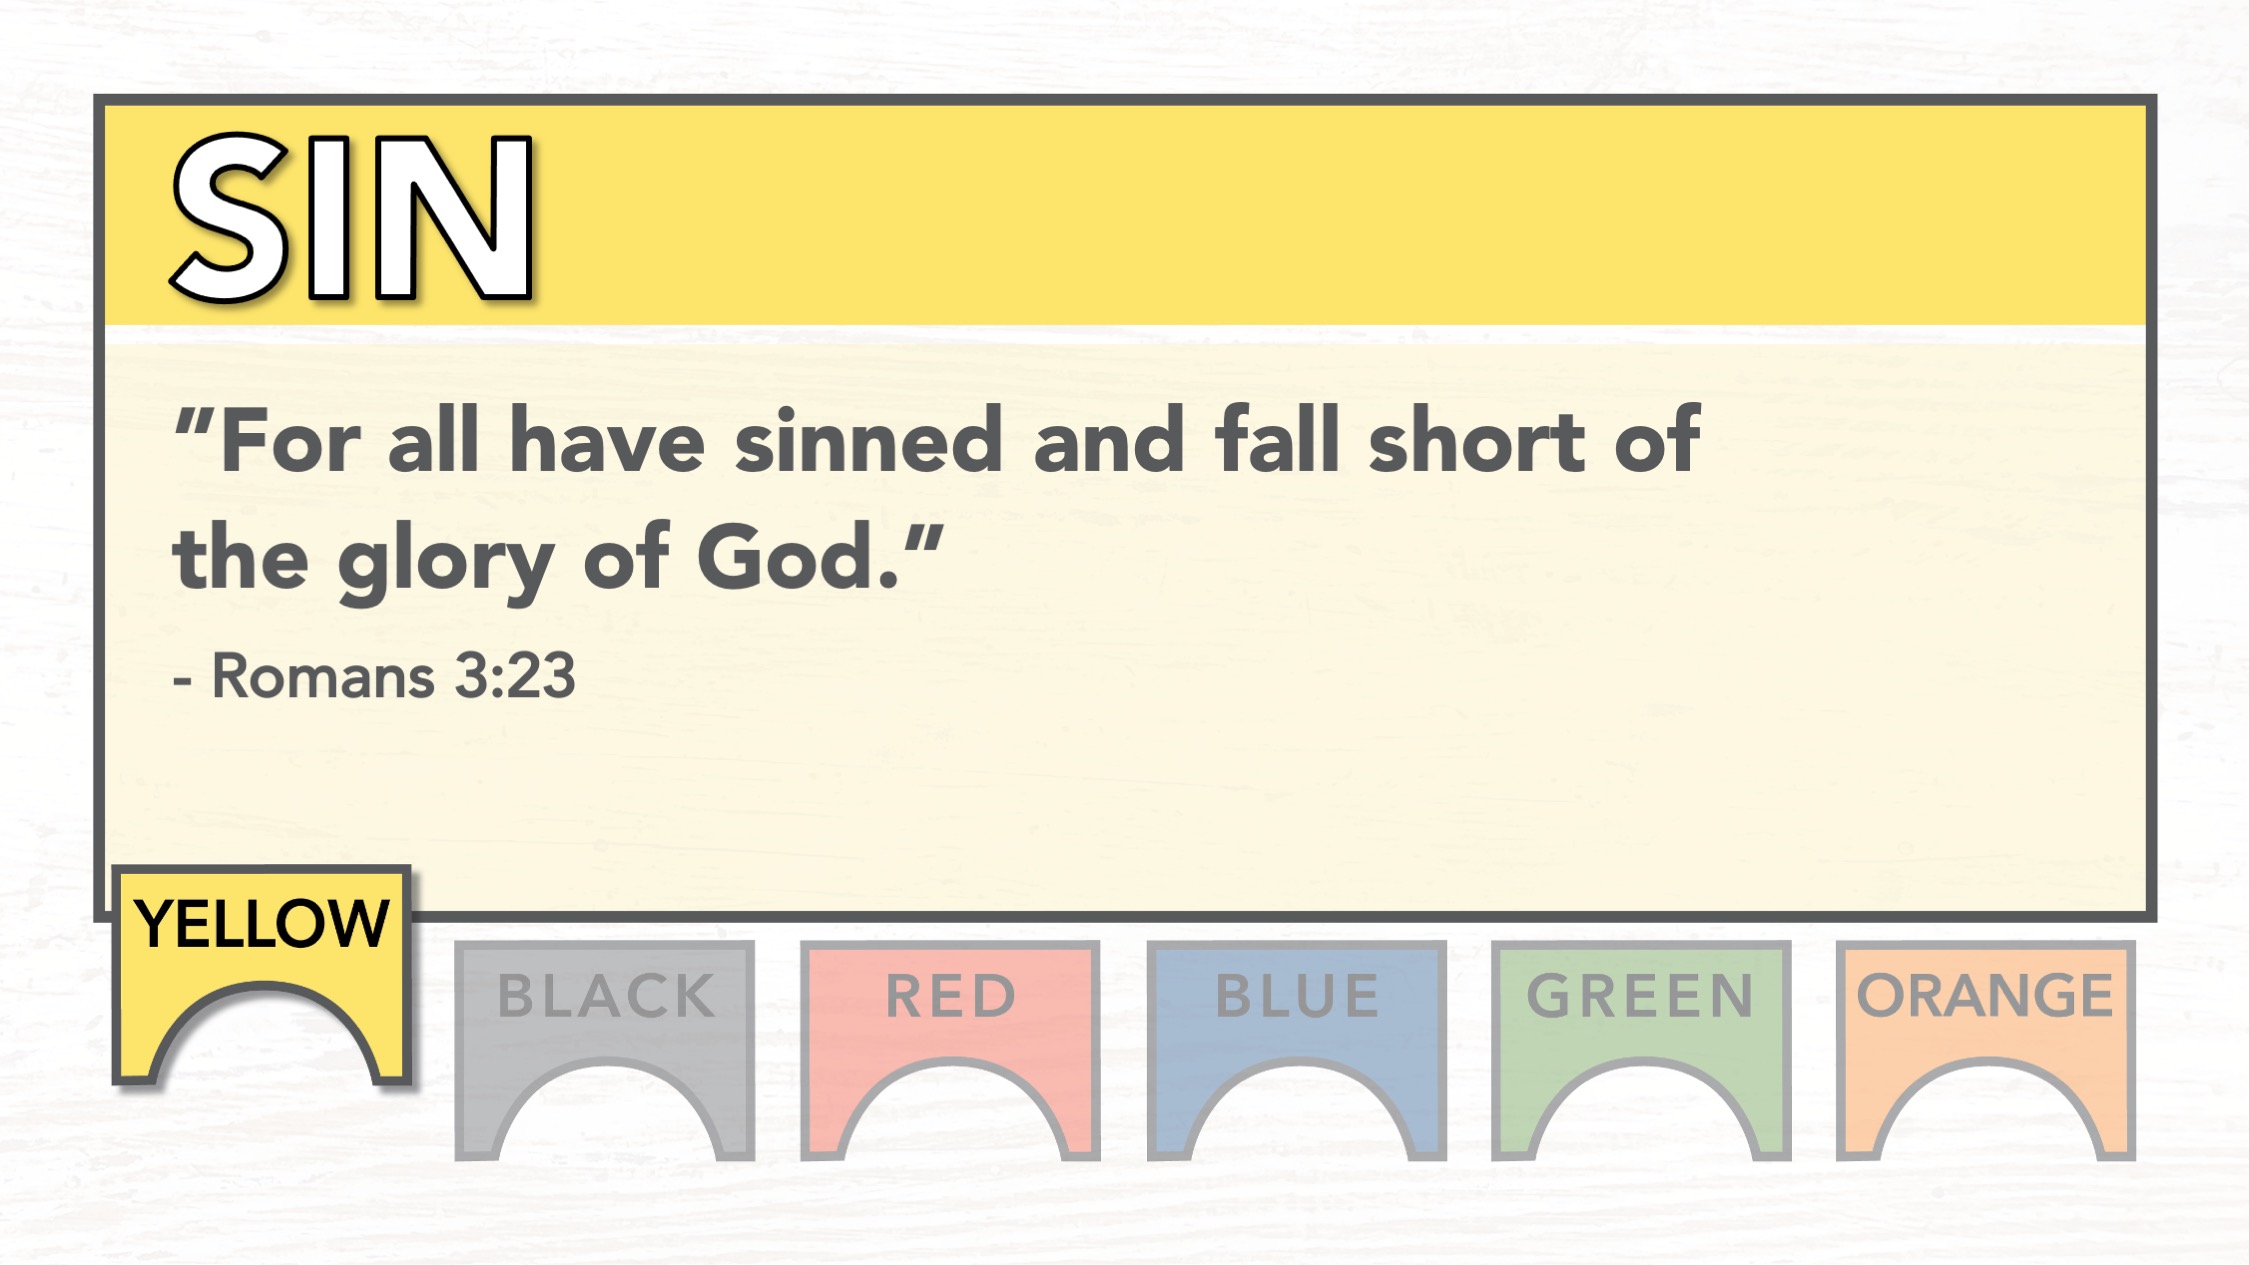 Yellow - Sin: "For all have sinned and fall short of the glory of God." Romans 3:23